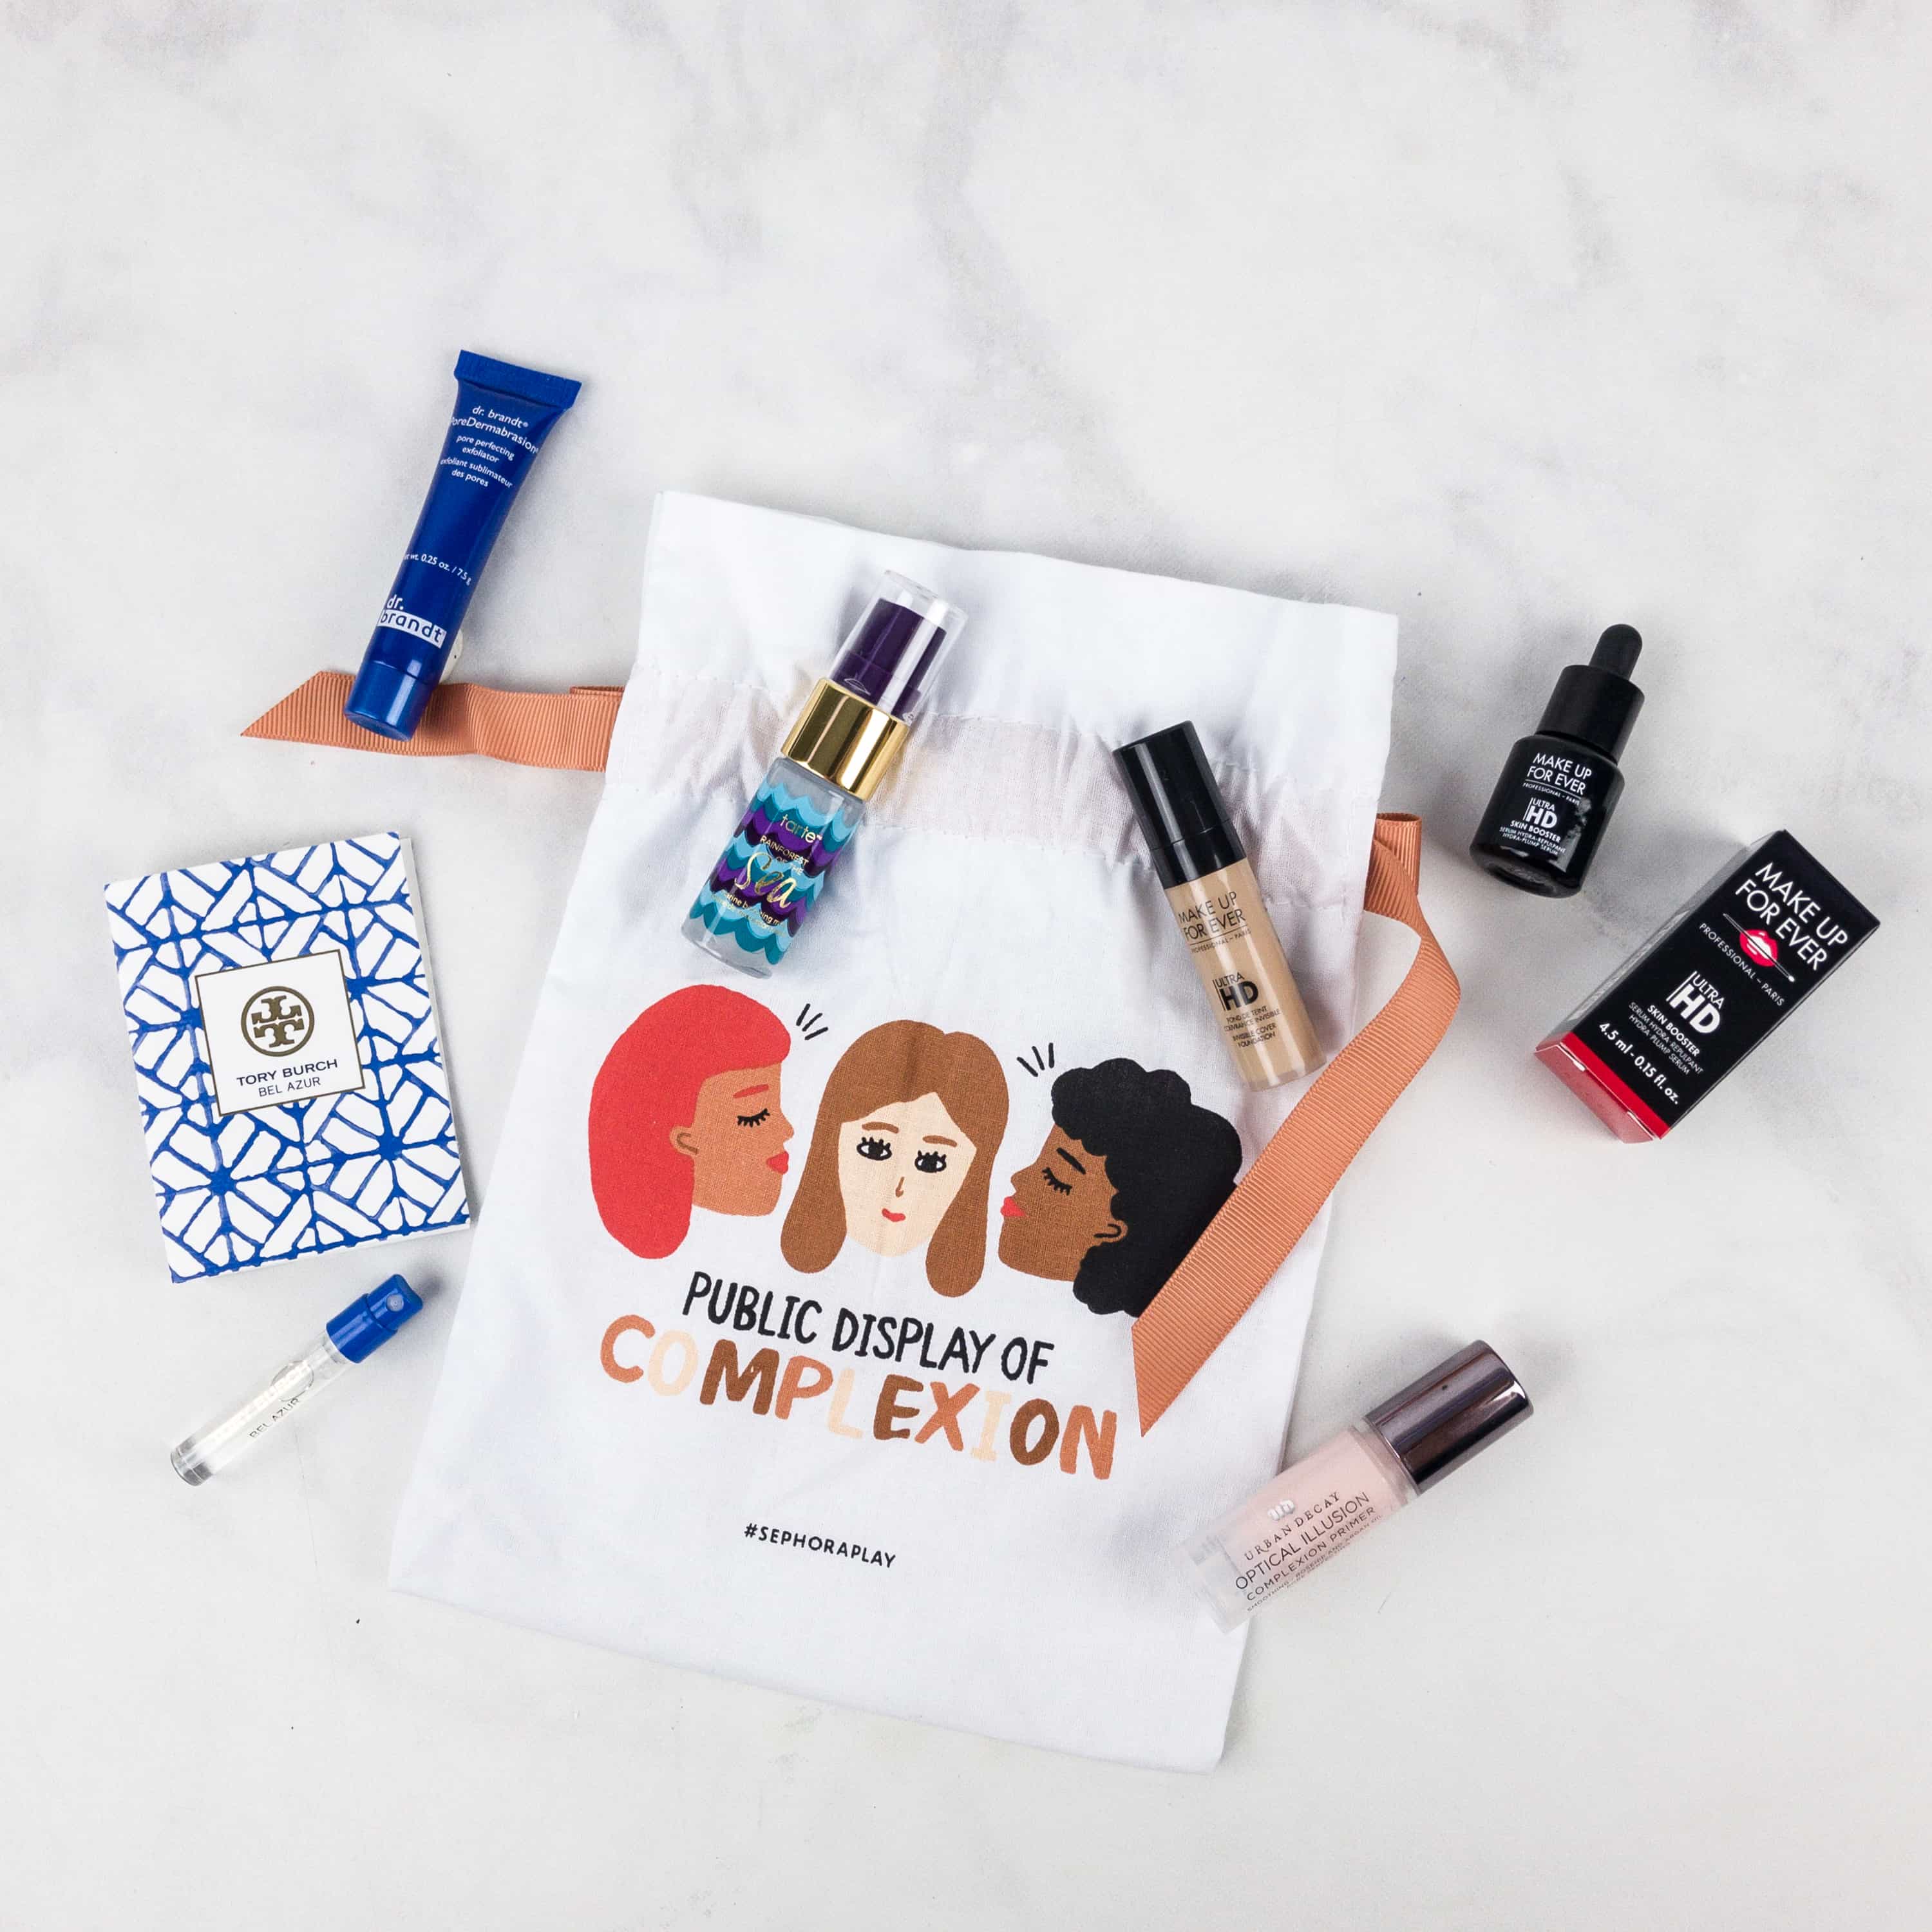 Play! by Sephora October 2017 Subscription Box Review - Hello Subscription